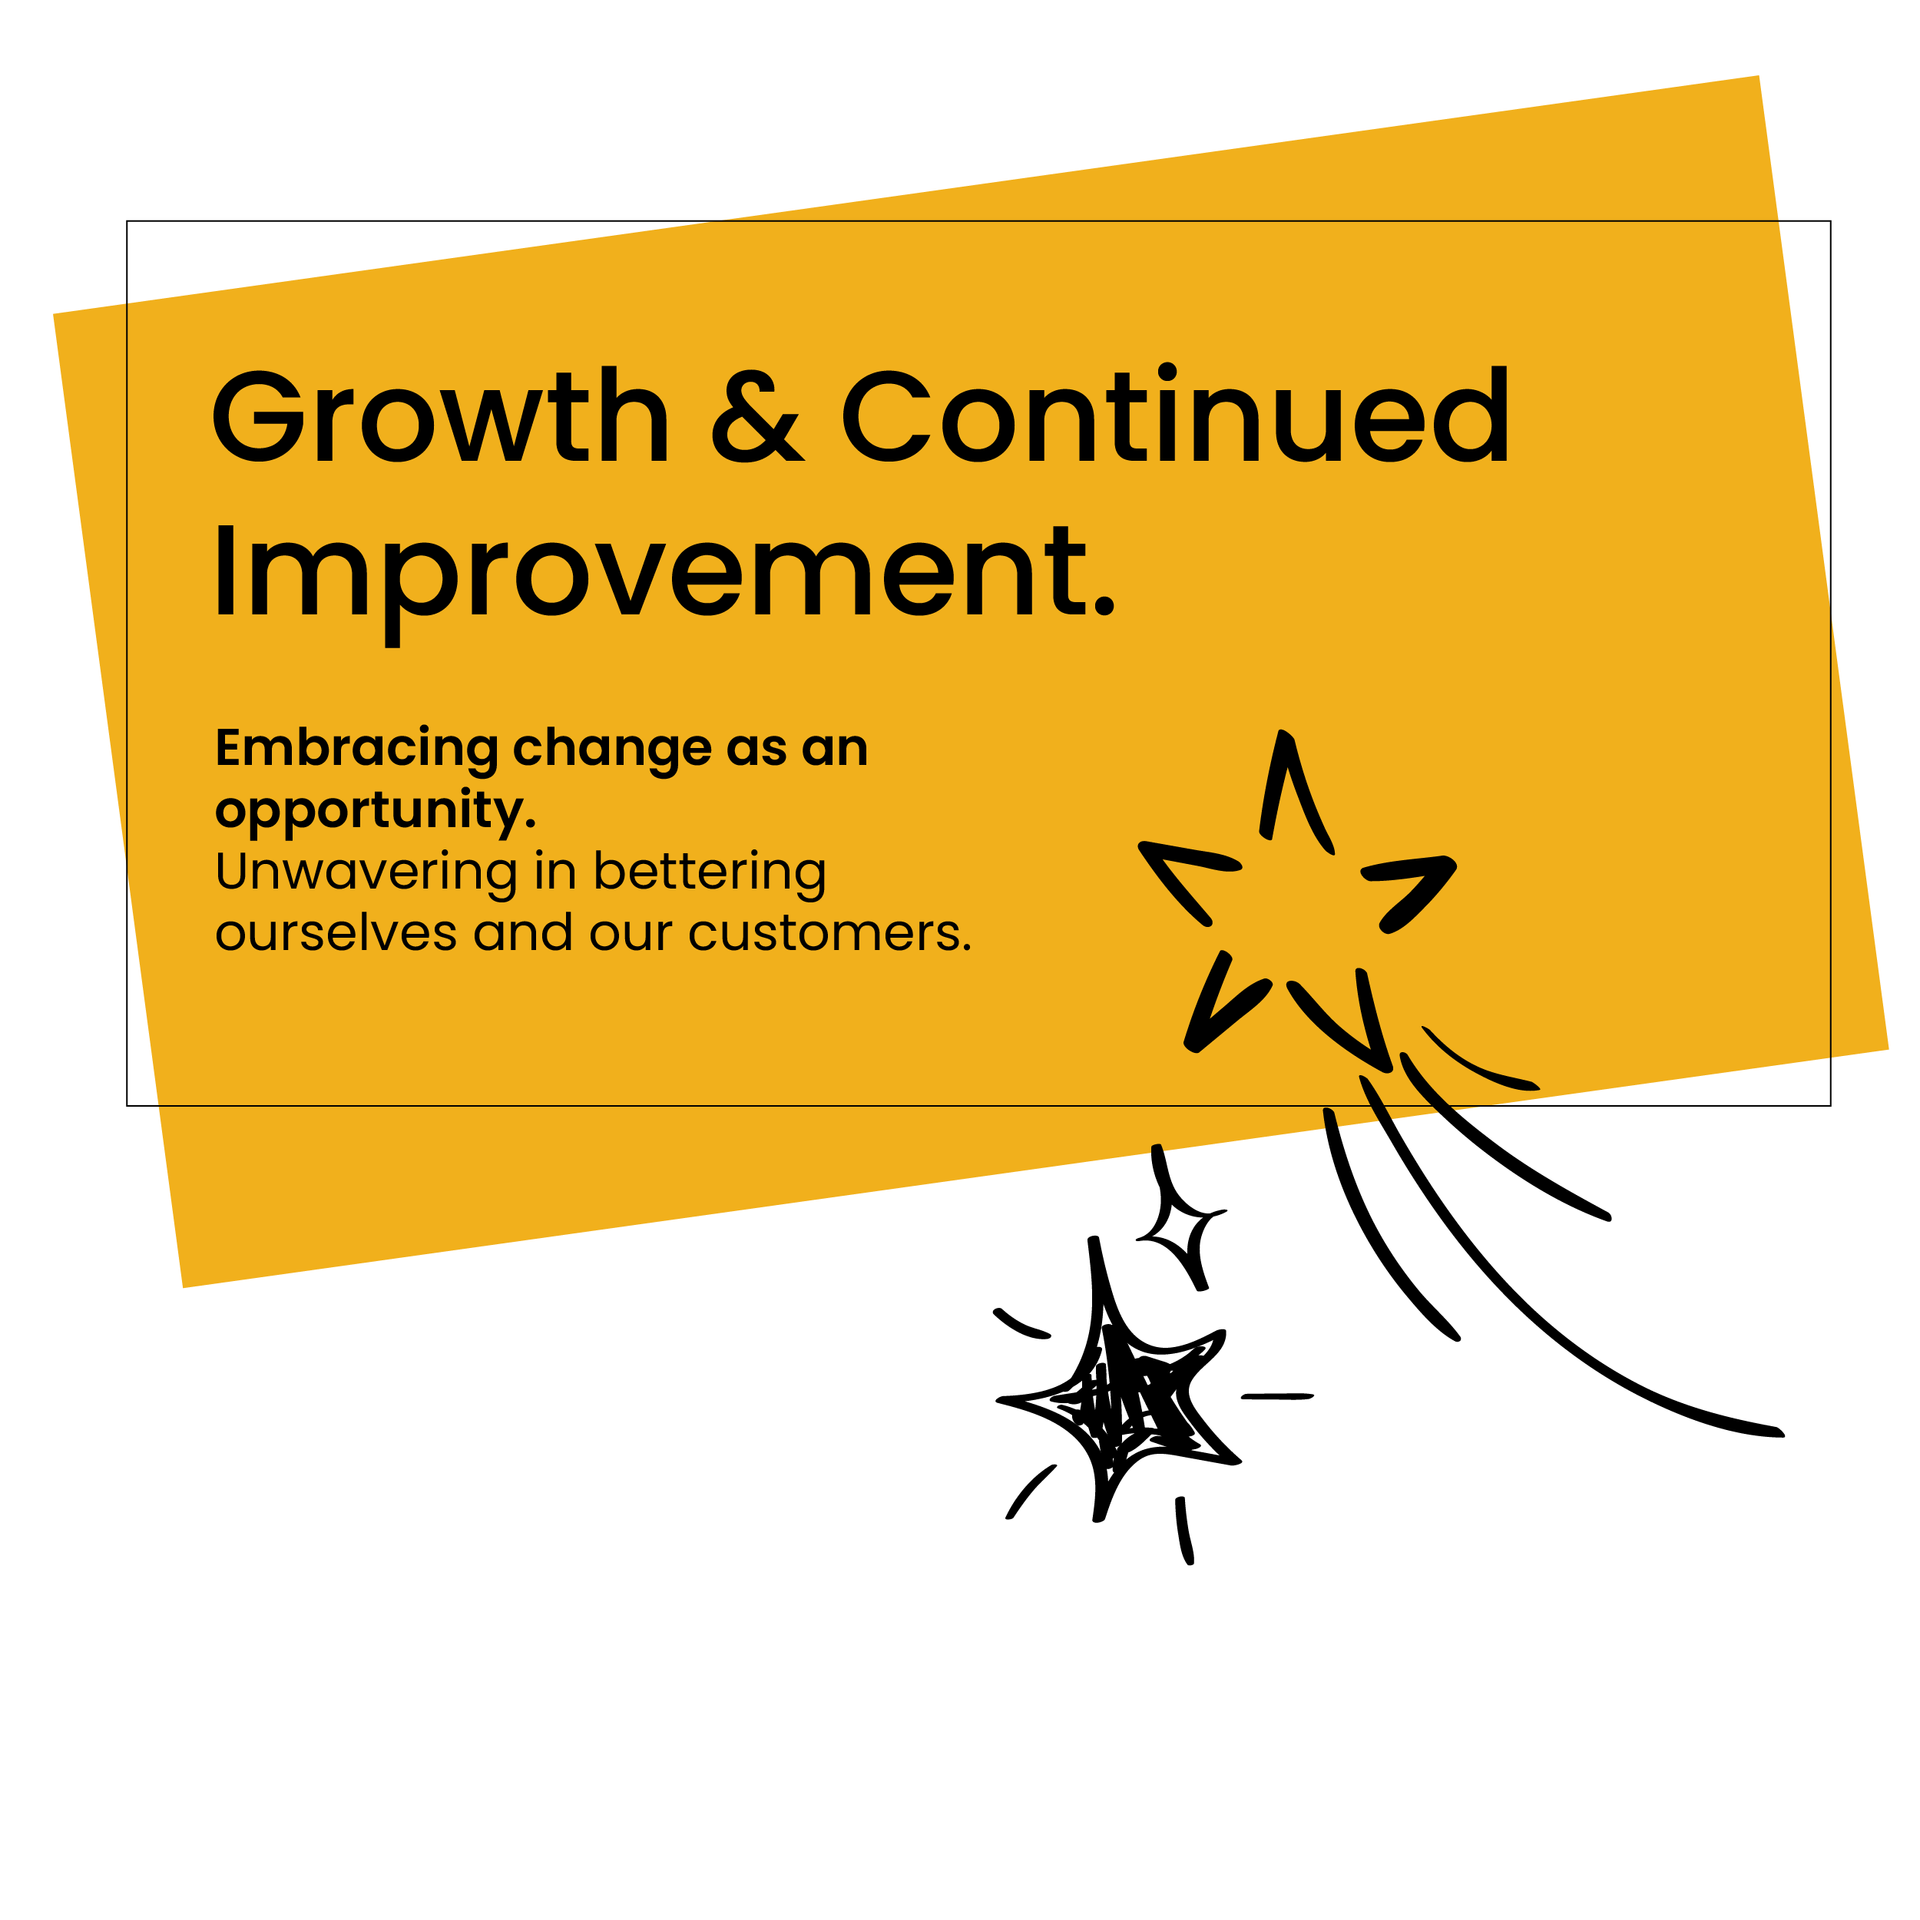 Shooting stars image to represent growth and improvement